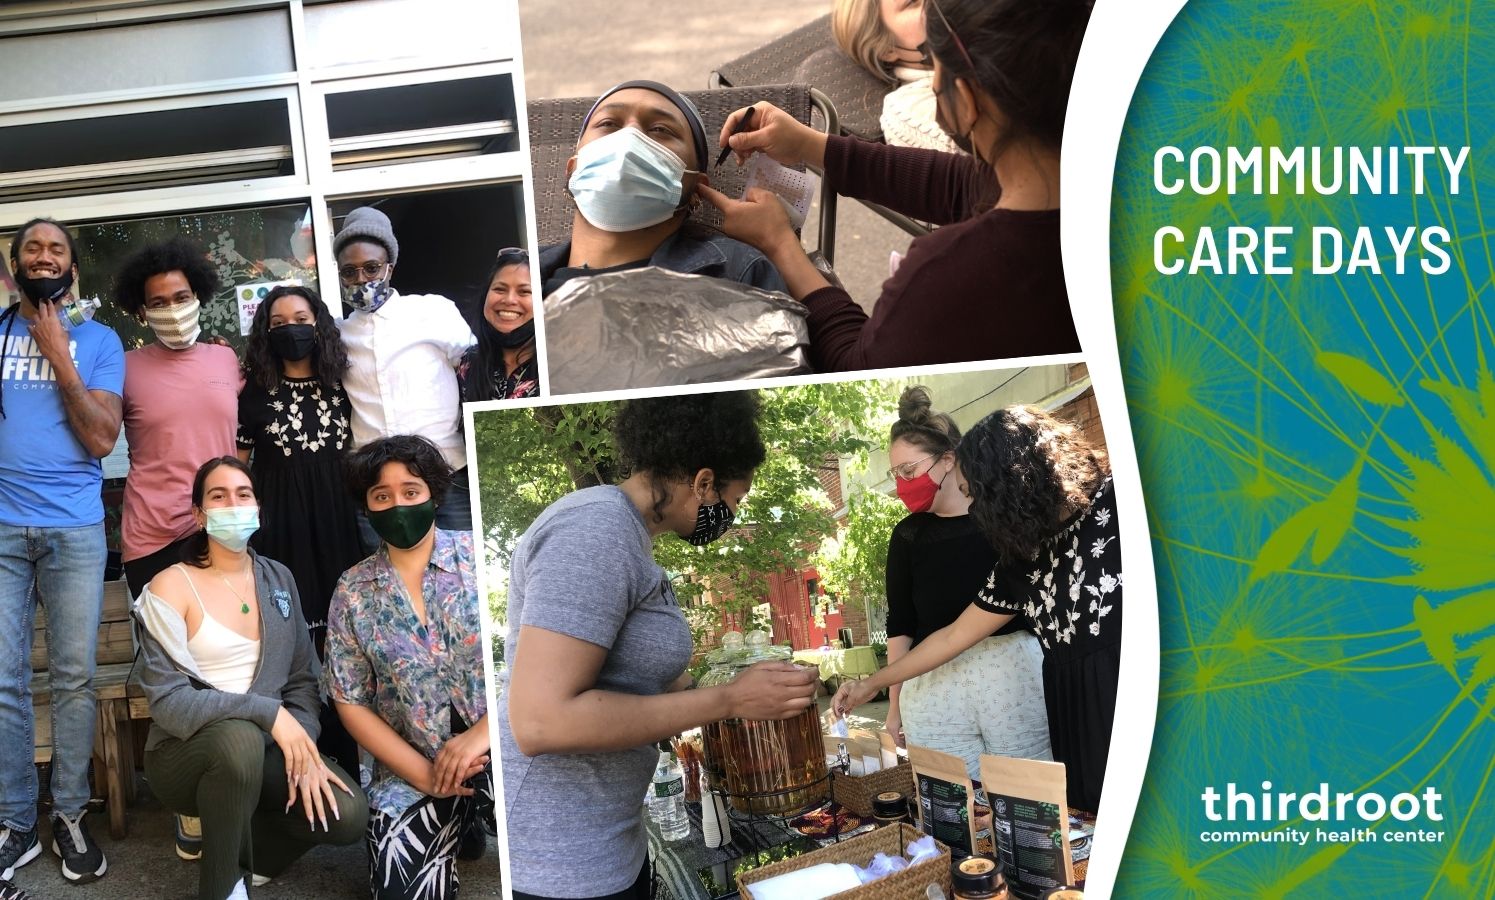 The text "Community Care Days" appears over the Third Root logo on the right, while a series of three photos is on the left, showing a person receiving acupuncture, people buying herbal products, and staff members posing in masks in front of the store.